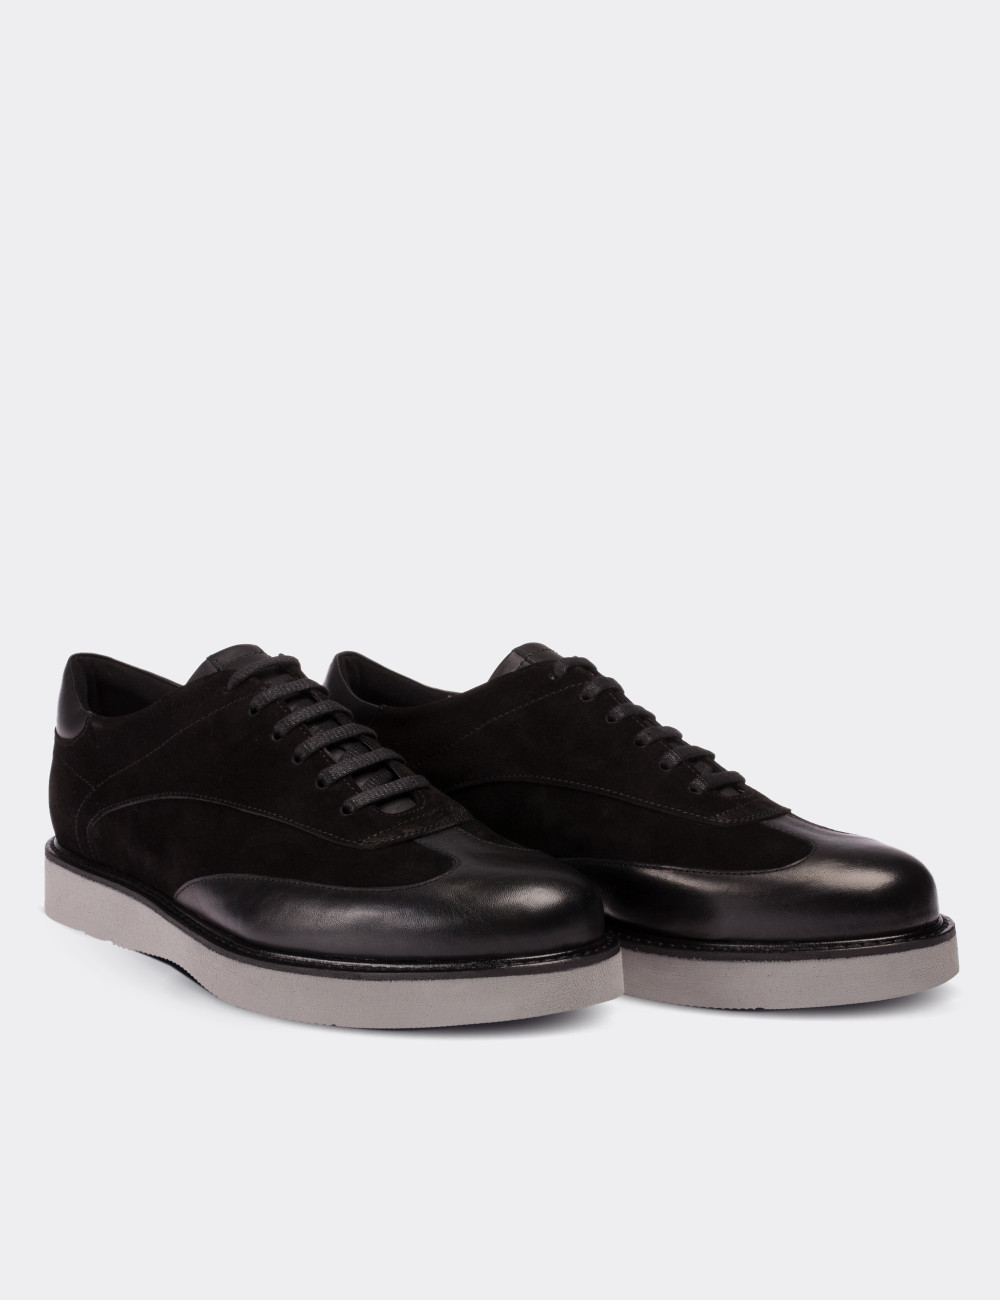 Black Suede Leather Lace-up Shoes - 01686MSYHE01